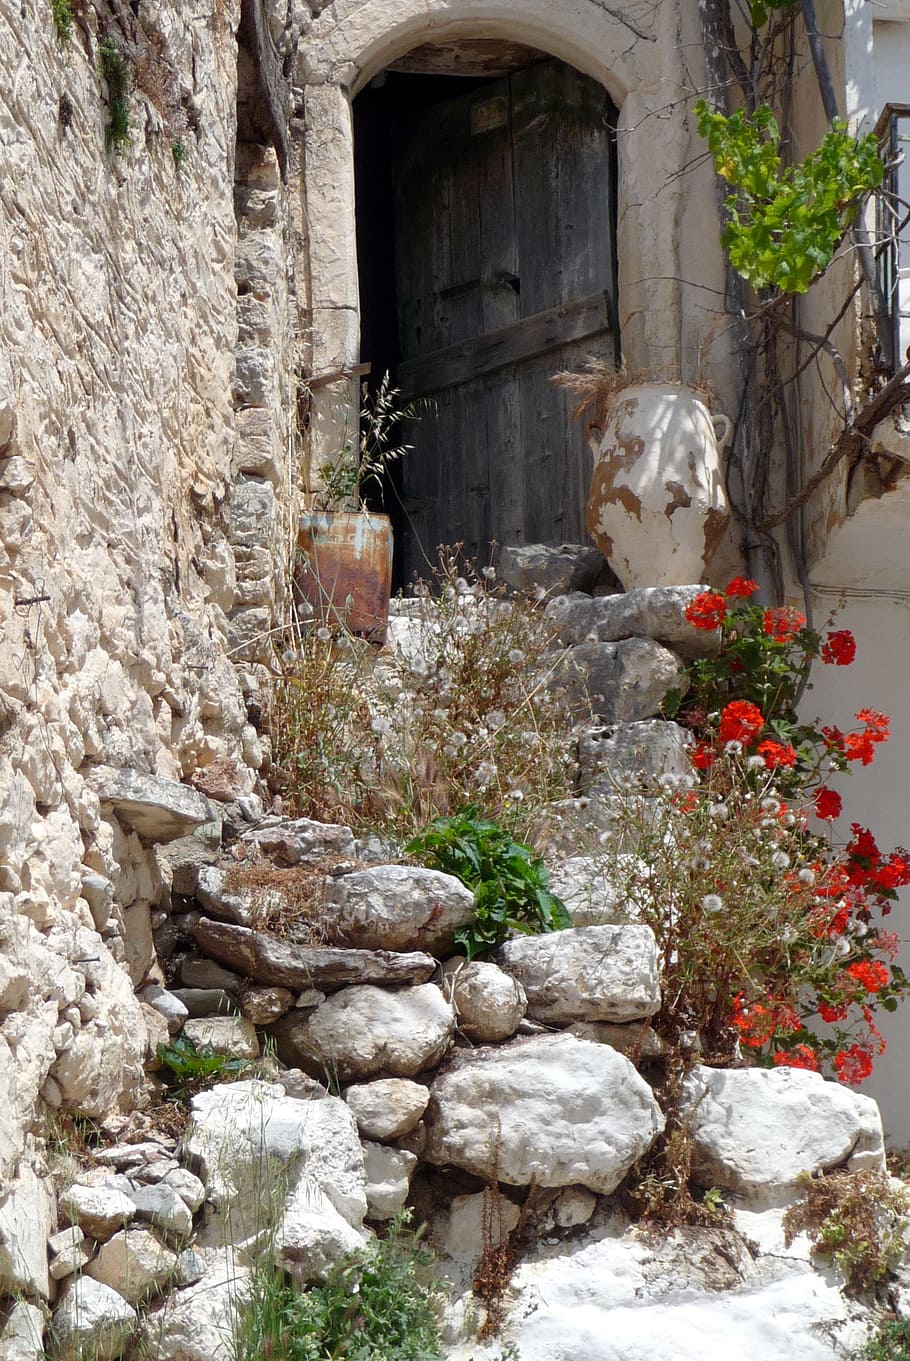 crete, greece, stairs, stone, uins, old, plant, architecture